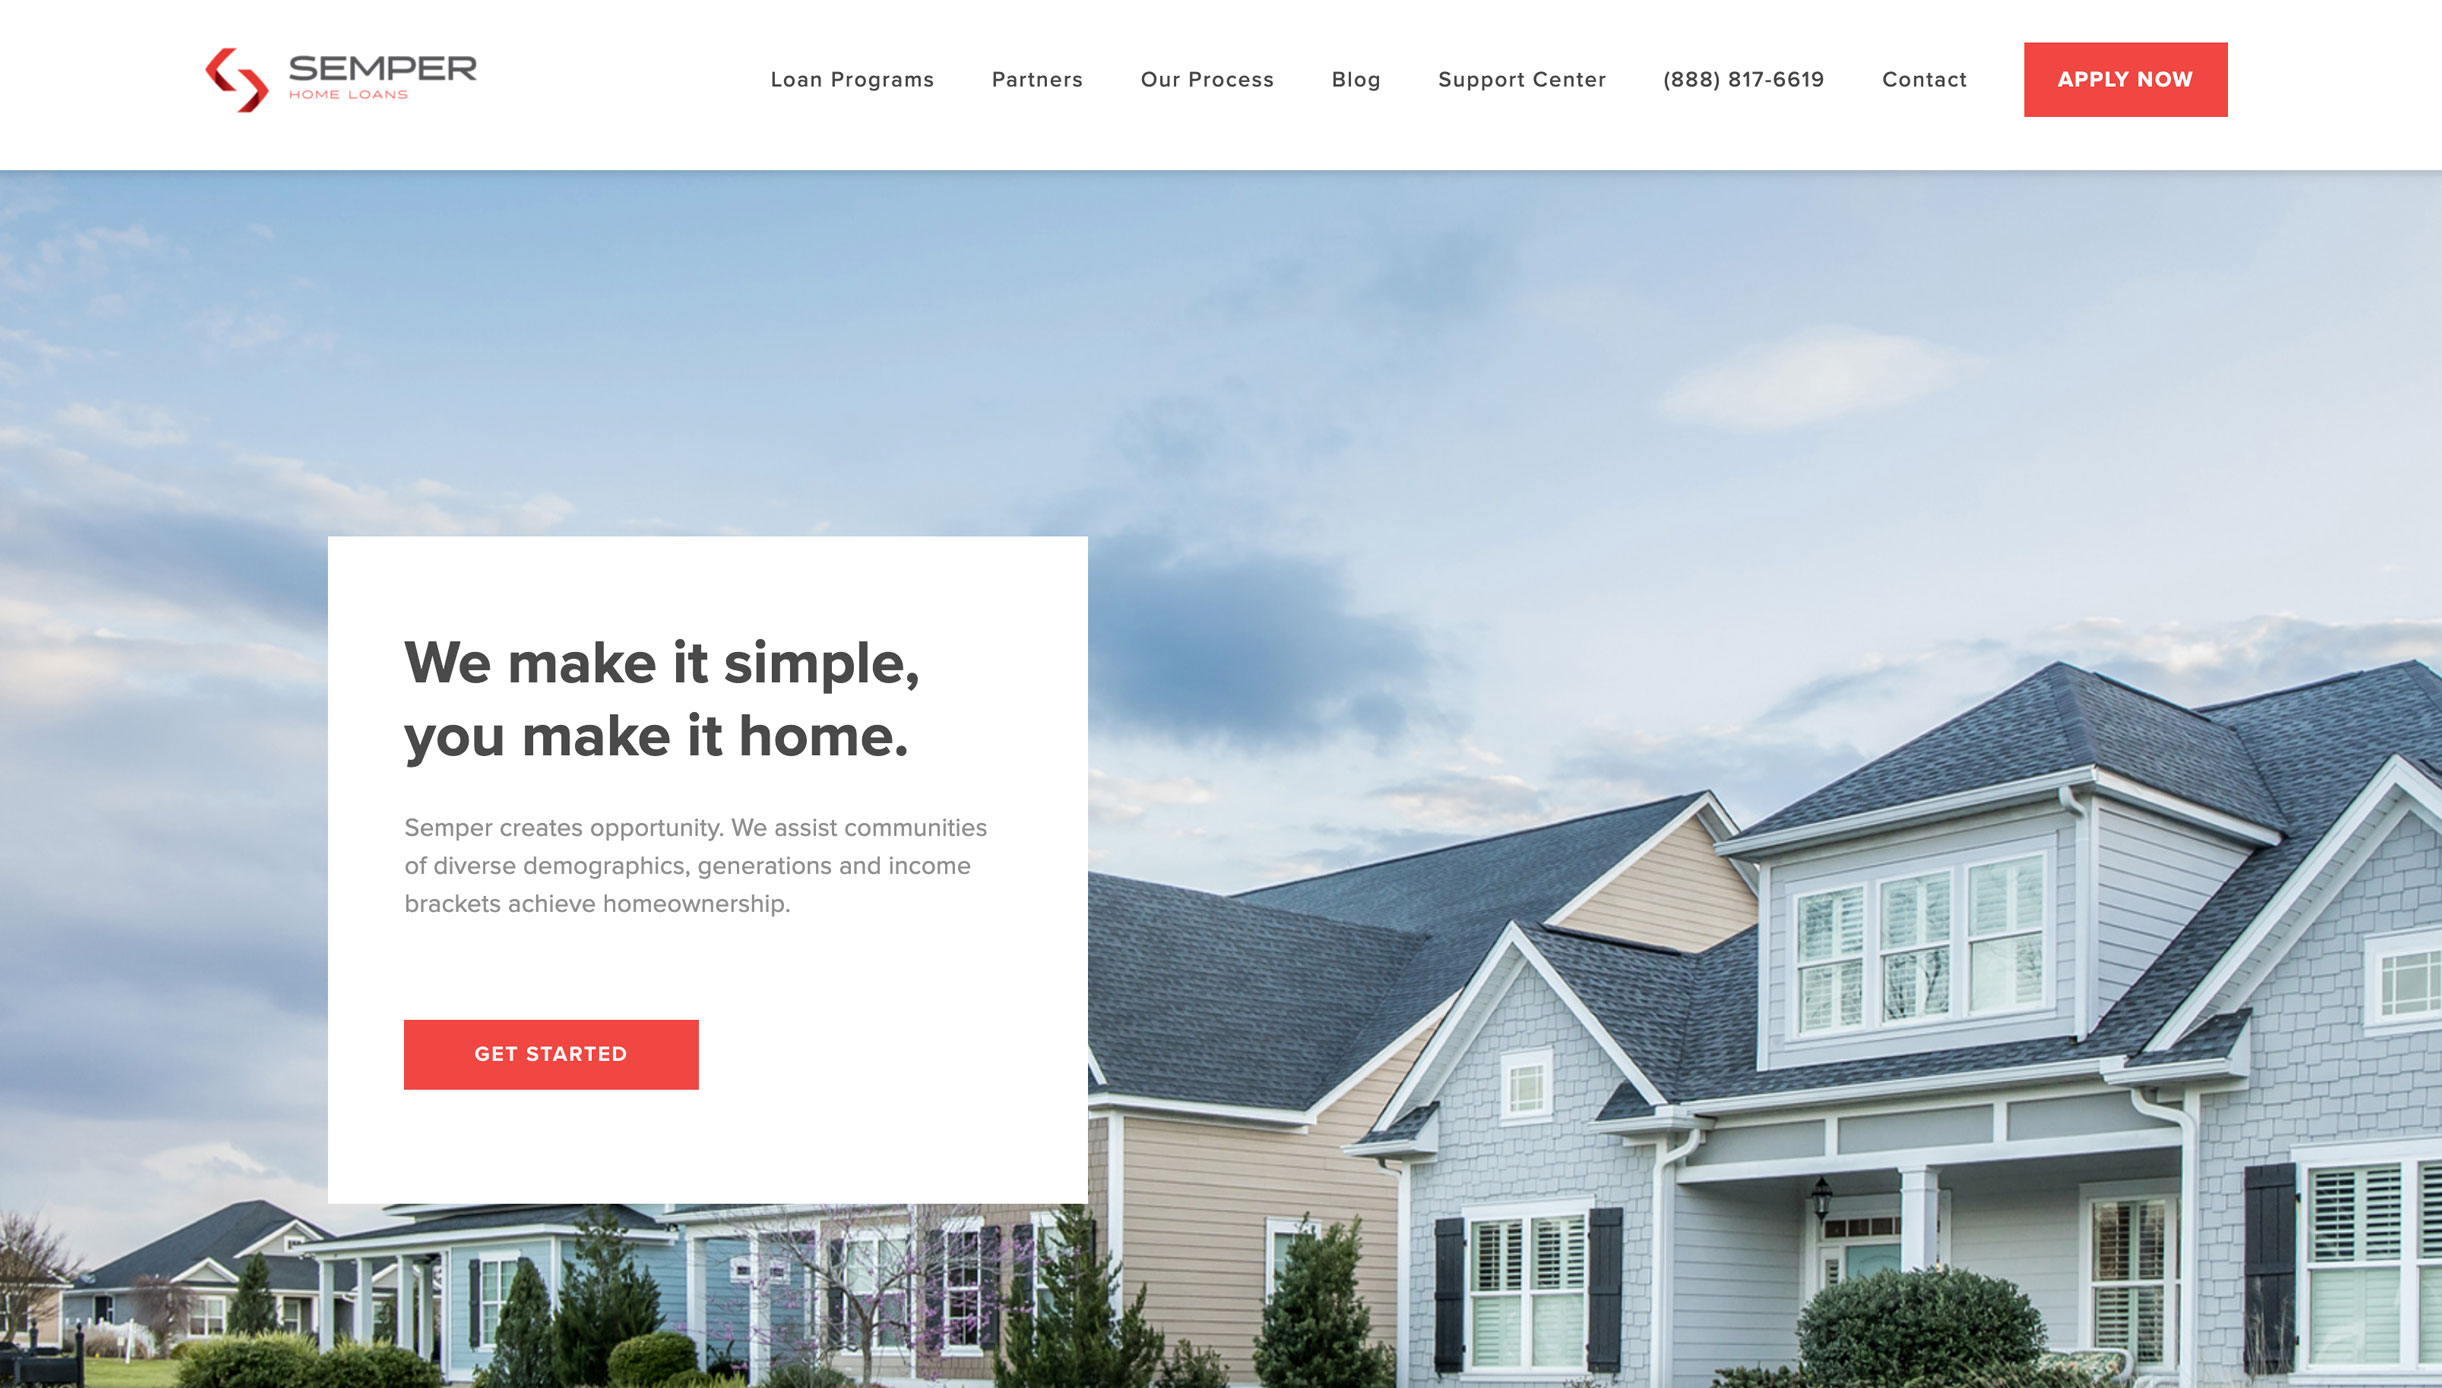 Professional website development for Semper Home Loans from Tony Ciccarone